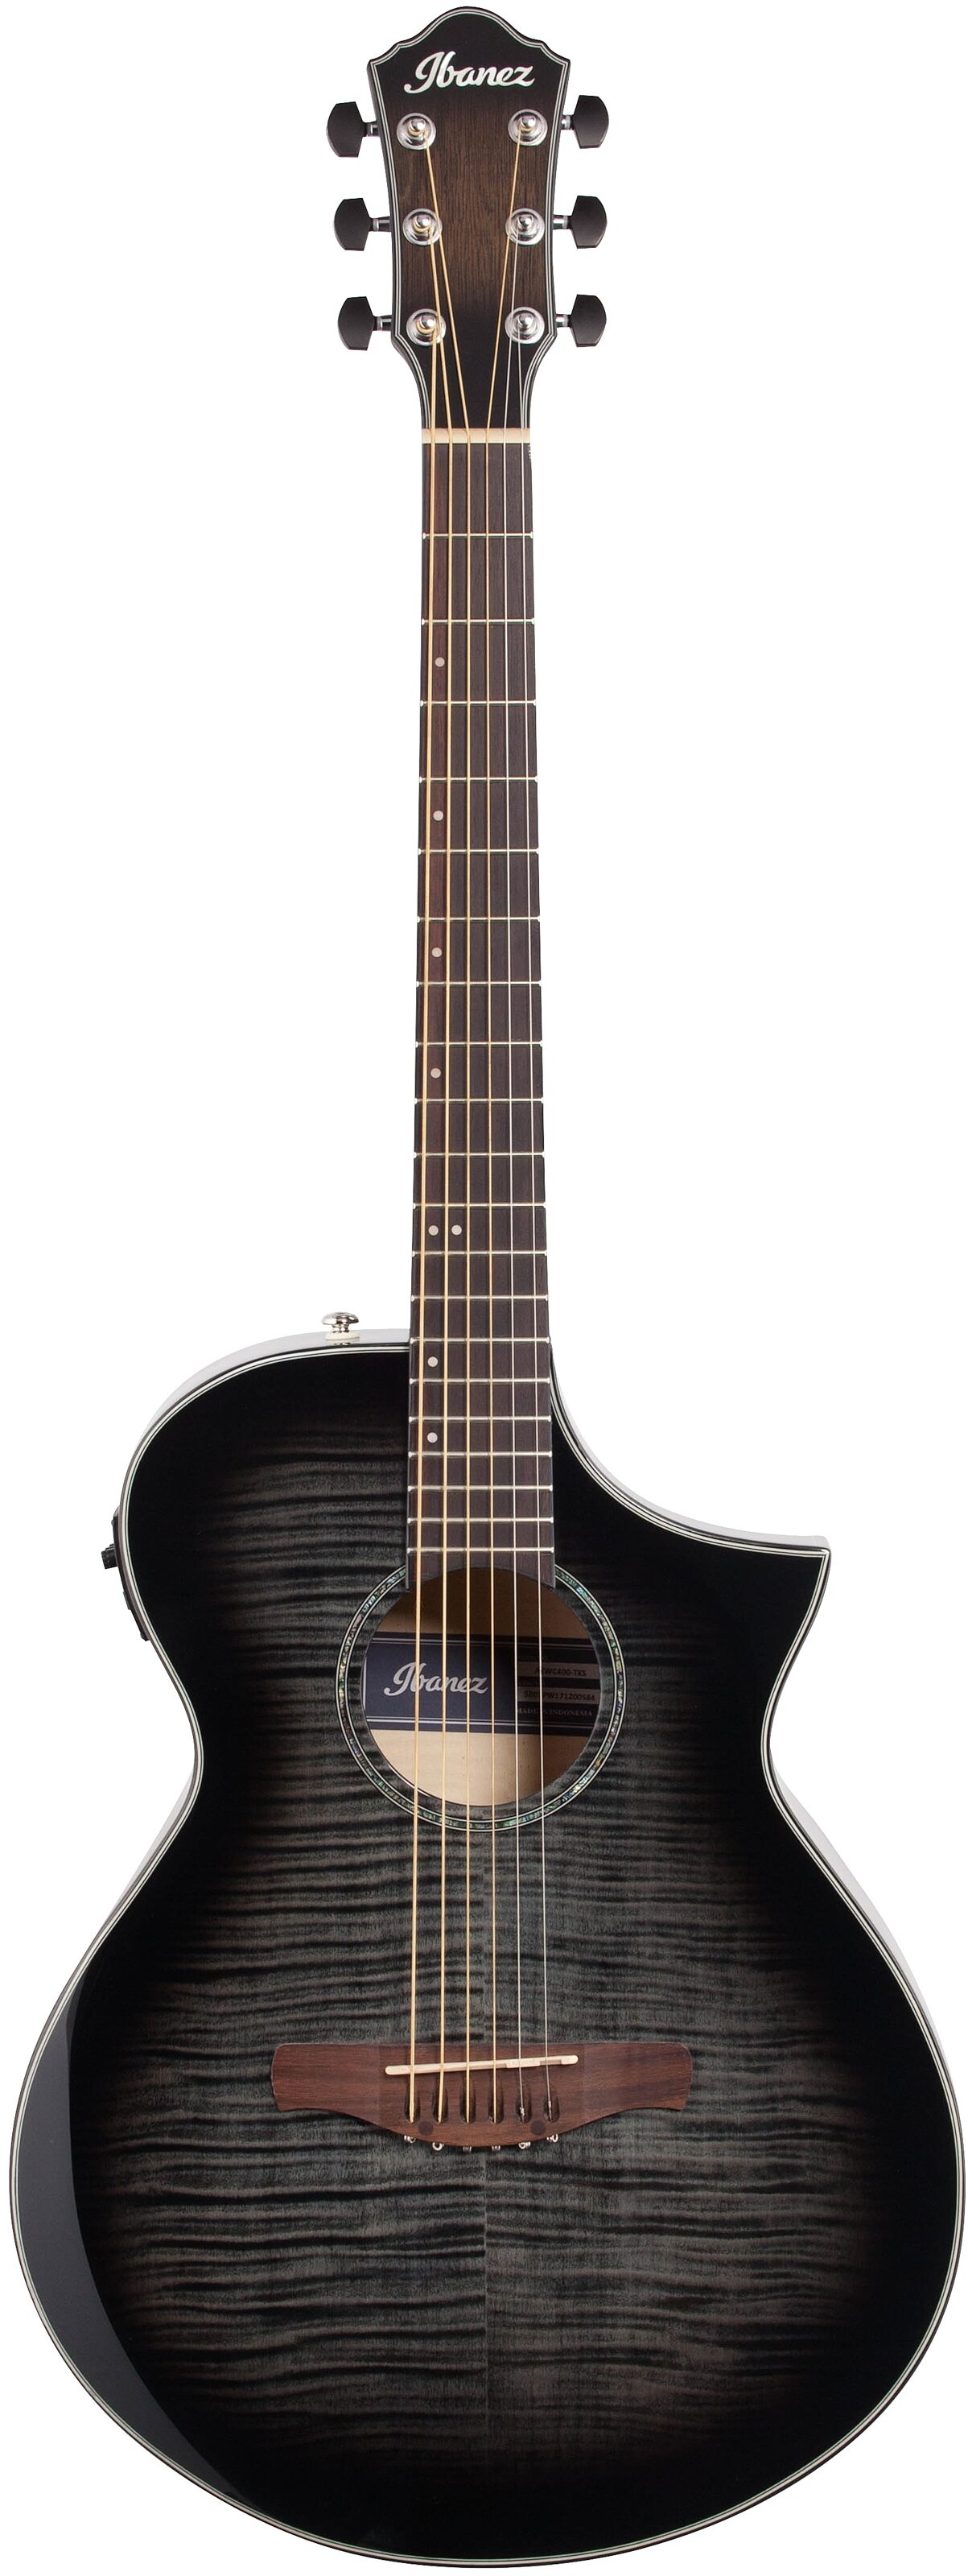 Ibanez AEWC400 Acoustic-Electric Guitar